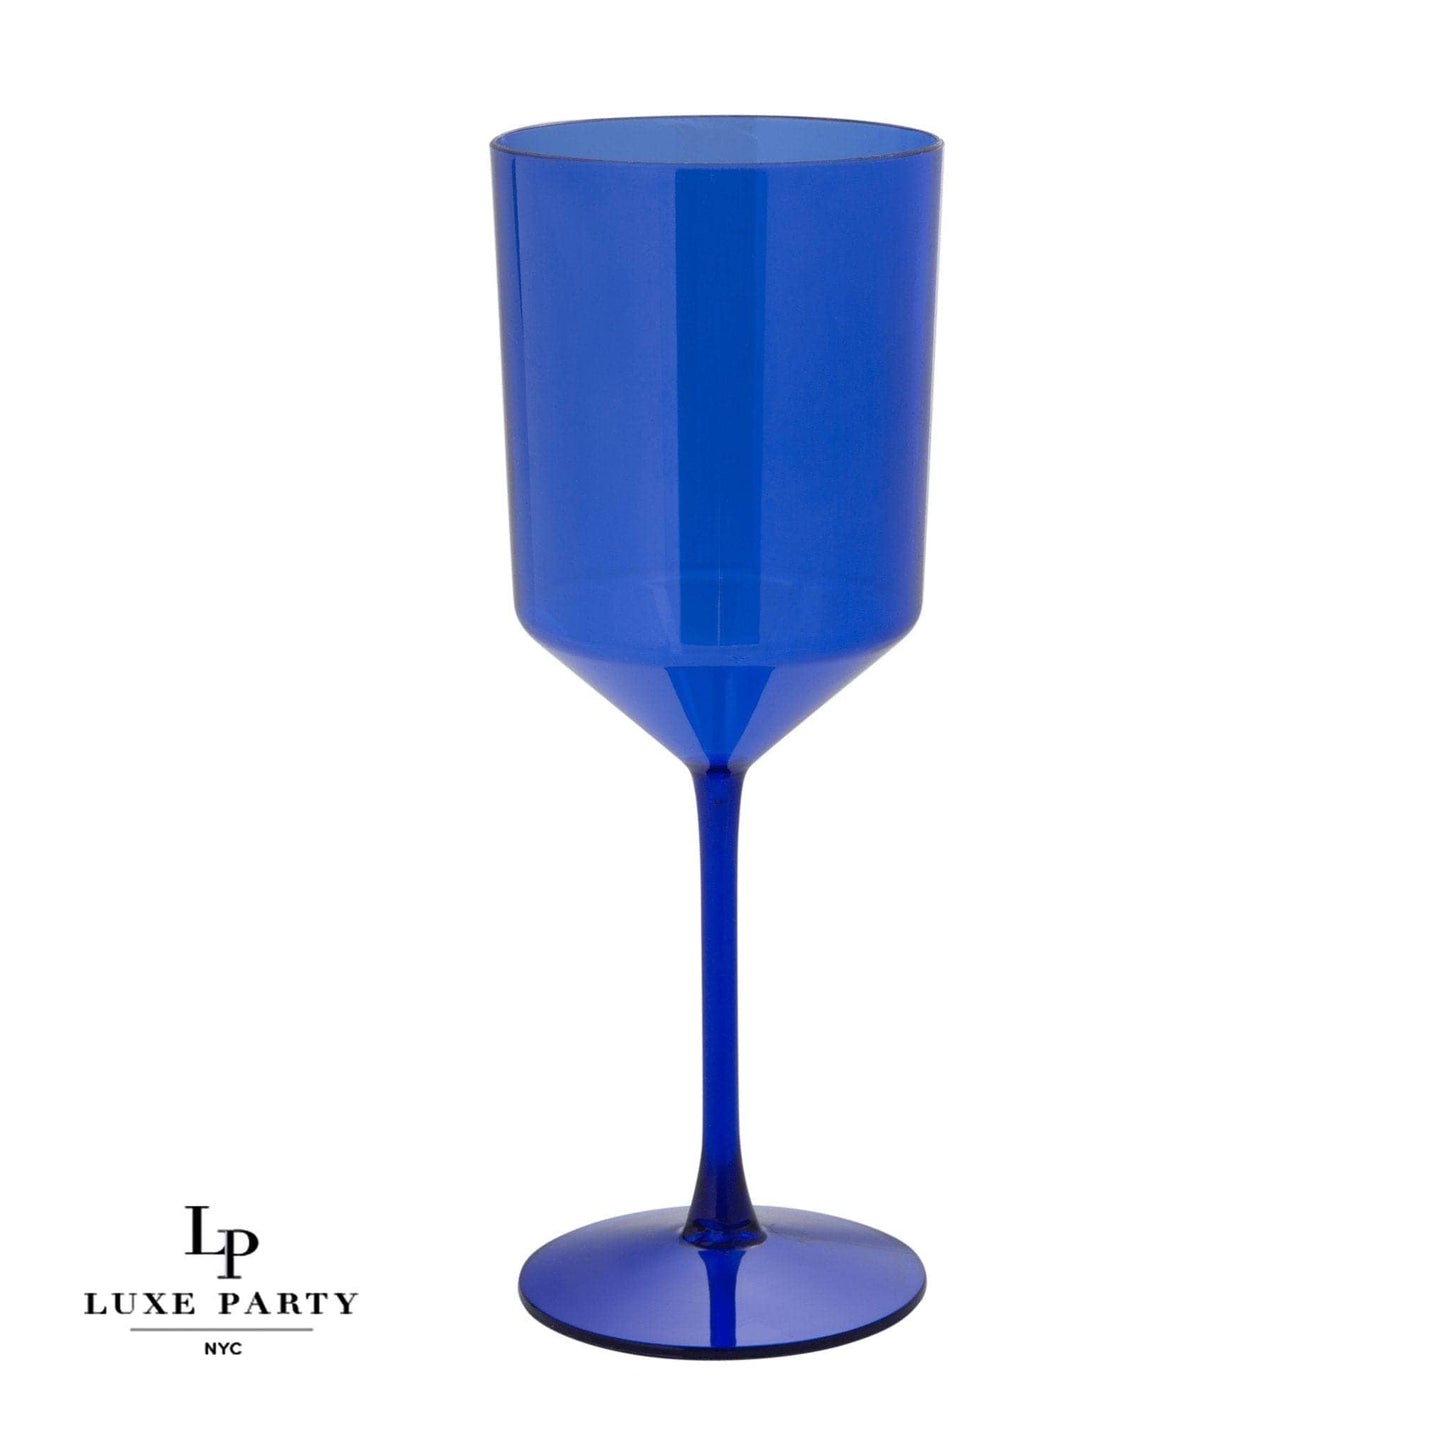 Luxe Party Upscale Plastic Wine Cups: Cobalt Blue